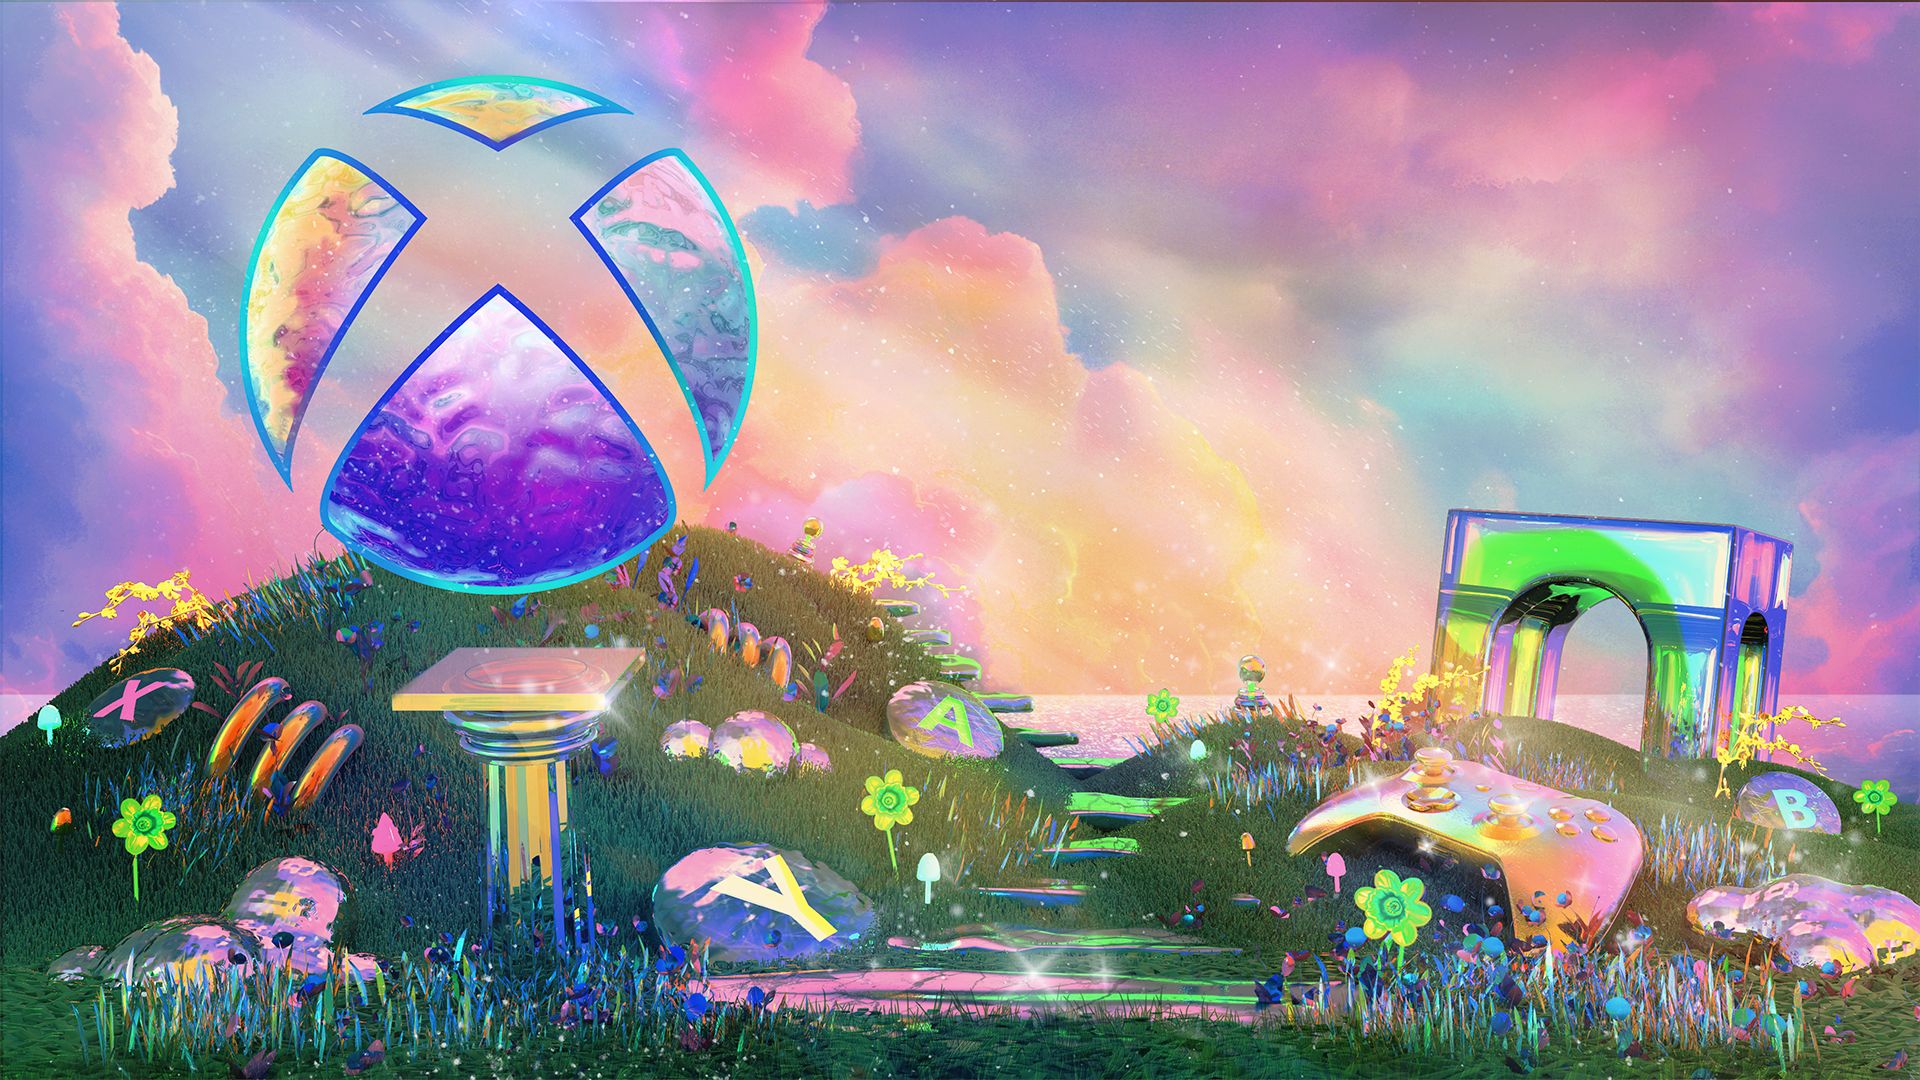 A magical, pastel landscape with rolling hills, the sea, and the sun reflecting off purple and pink clouds. An Xbox sphere sits in the upper left, reflecting the color of the sky. Iridescent plants, columns, Xbox buttons and Xbox controller are scattered throughout the grass.